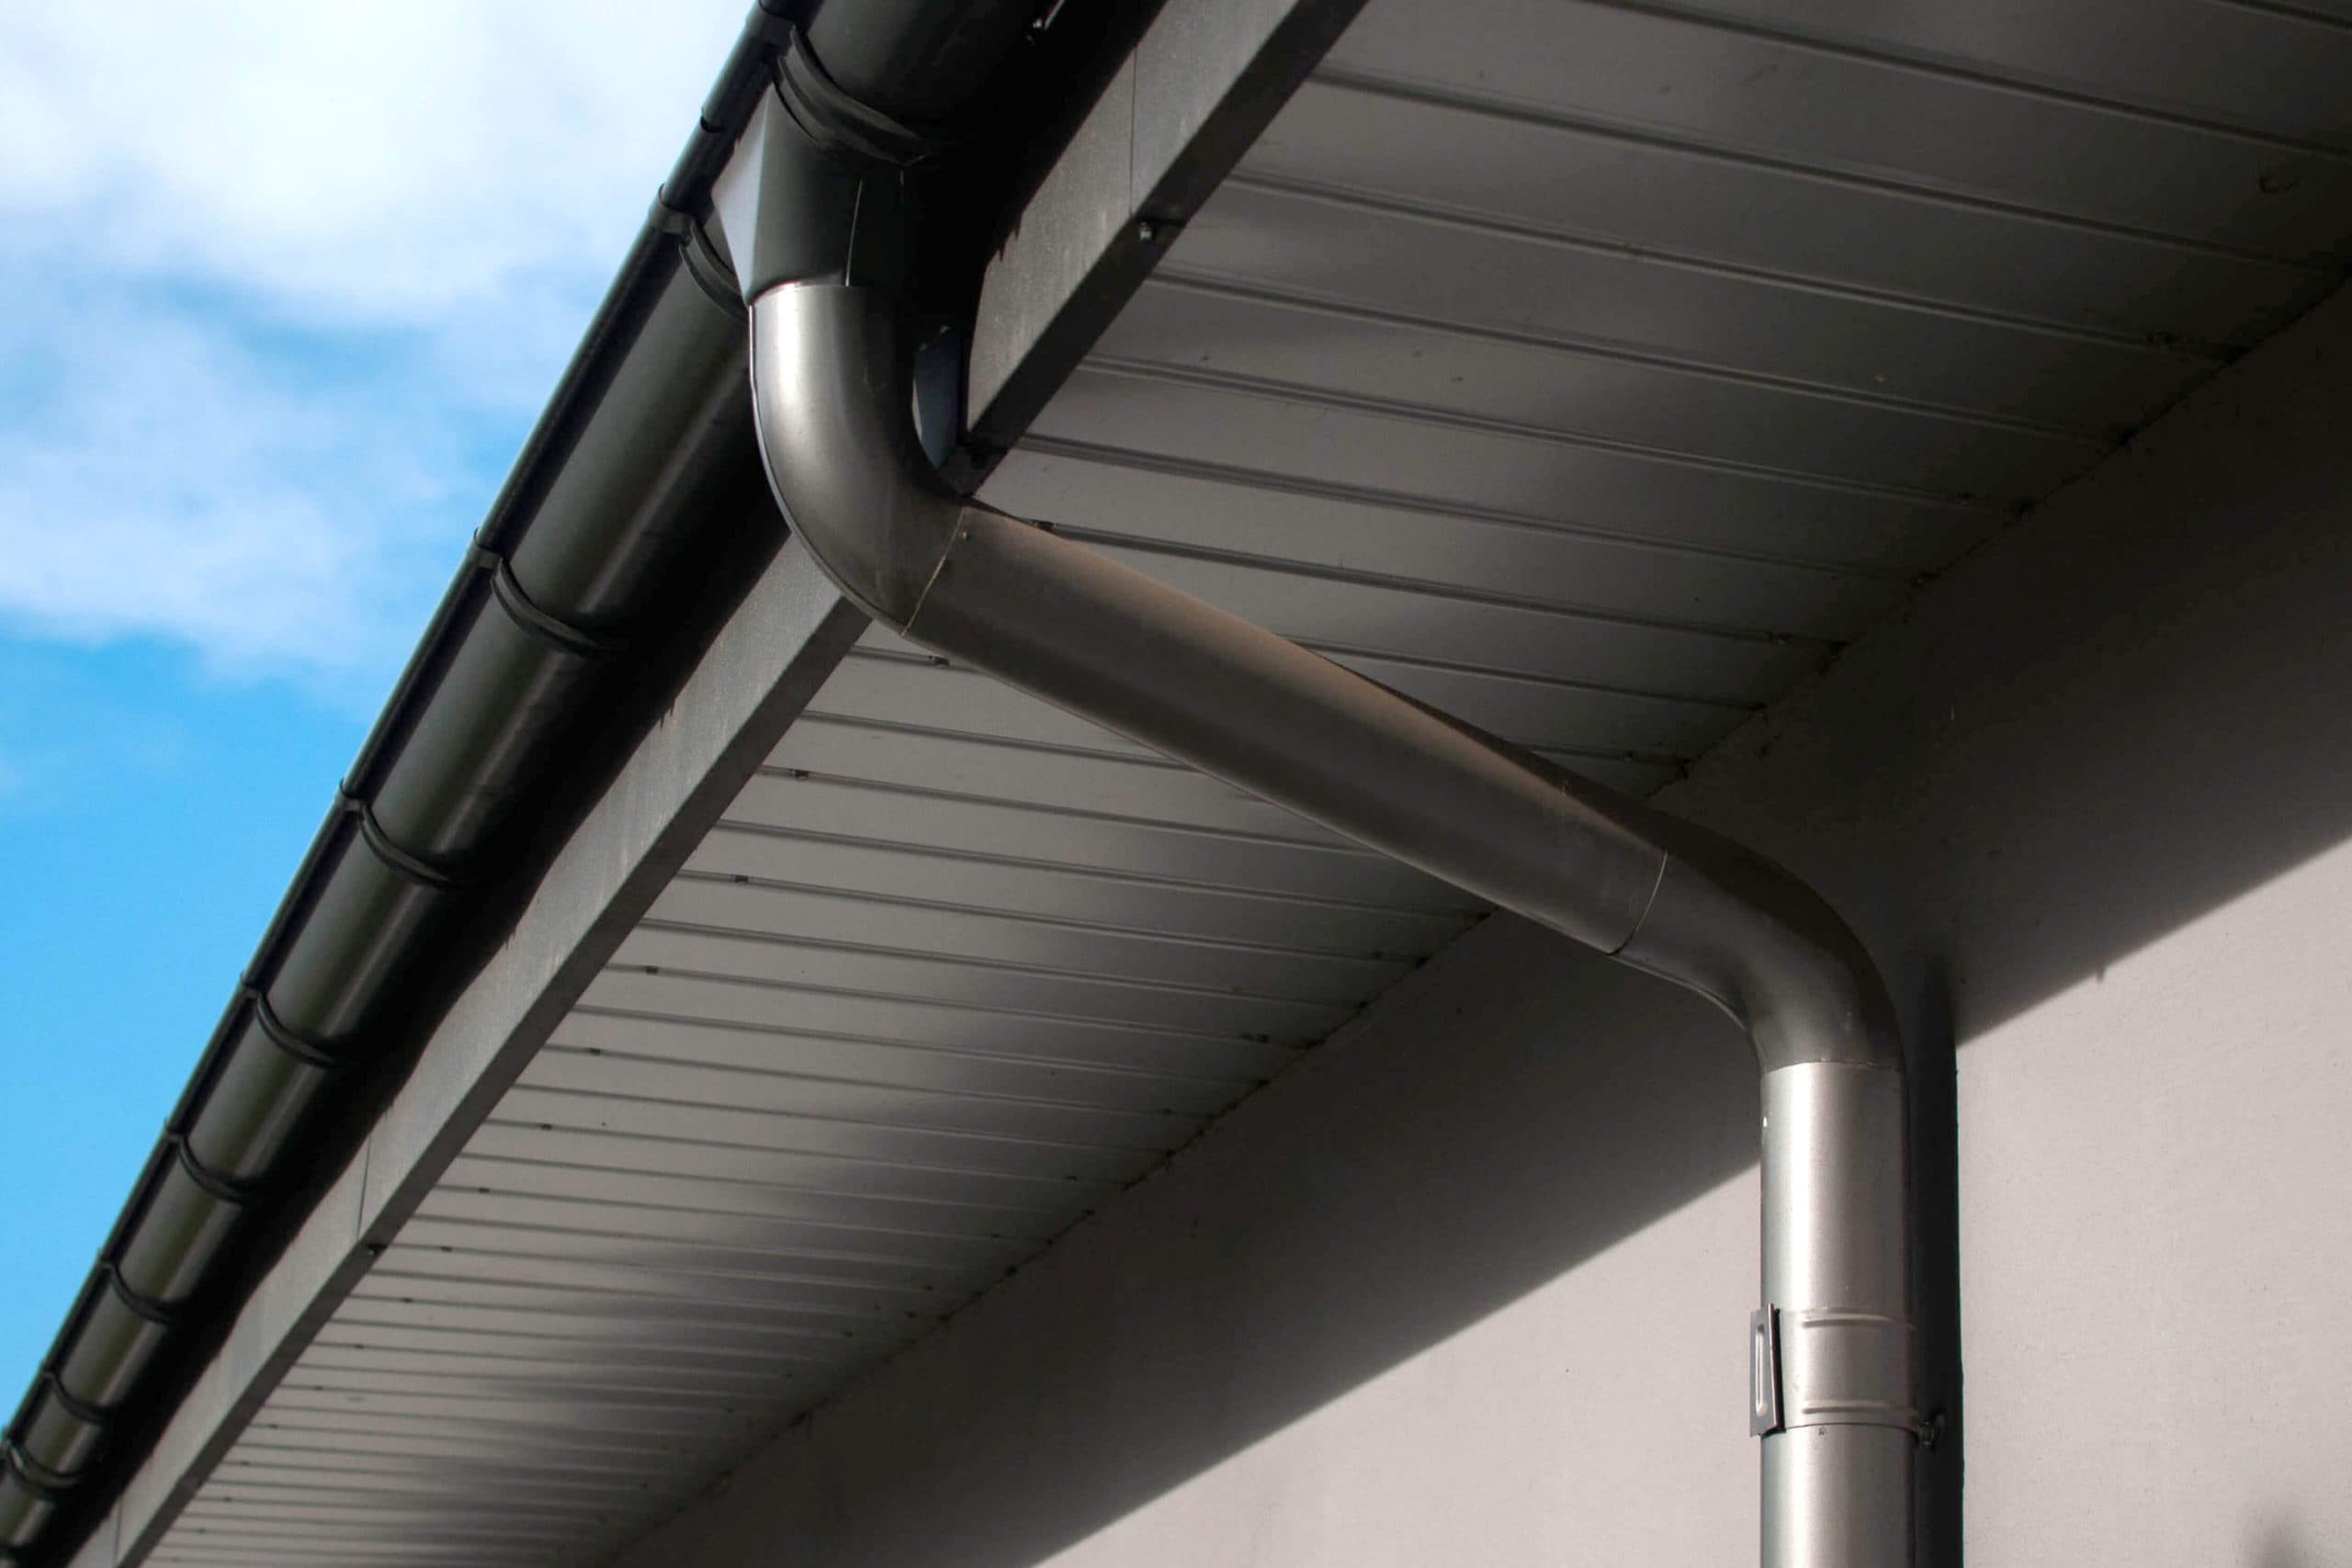 Corrosion-resistant galvanized gutters installed on a commercial building in Dallas